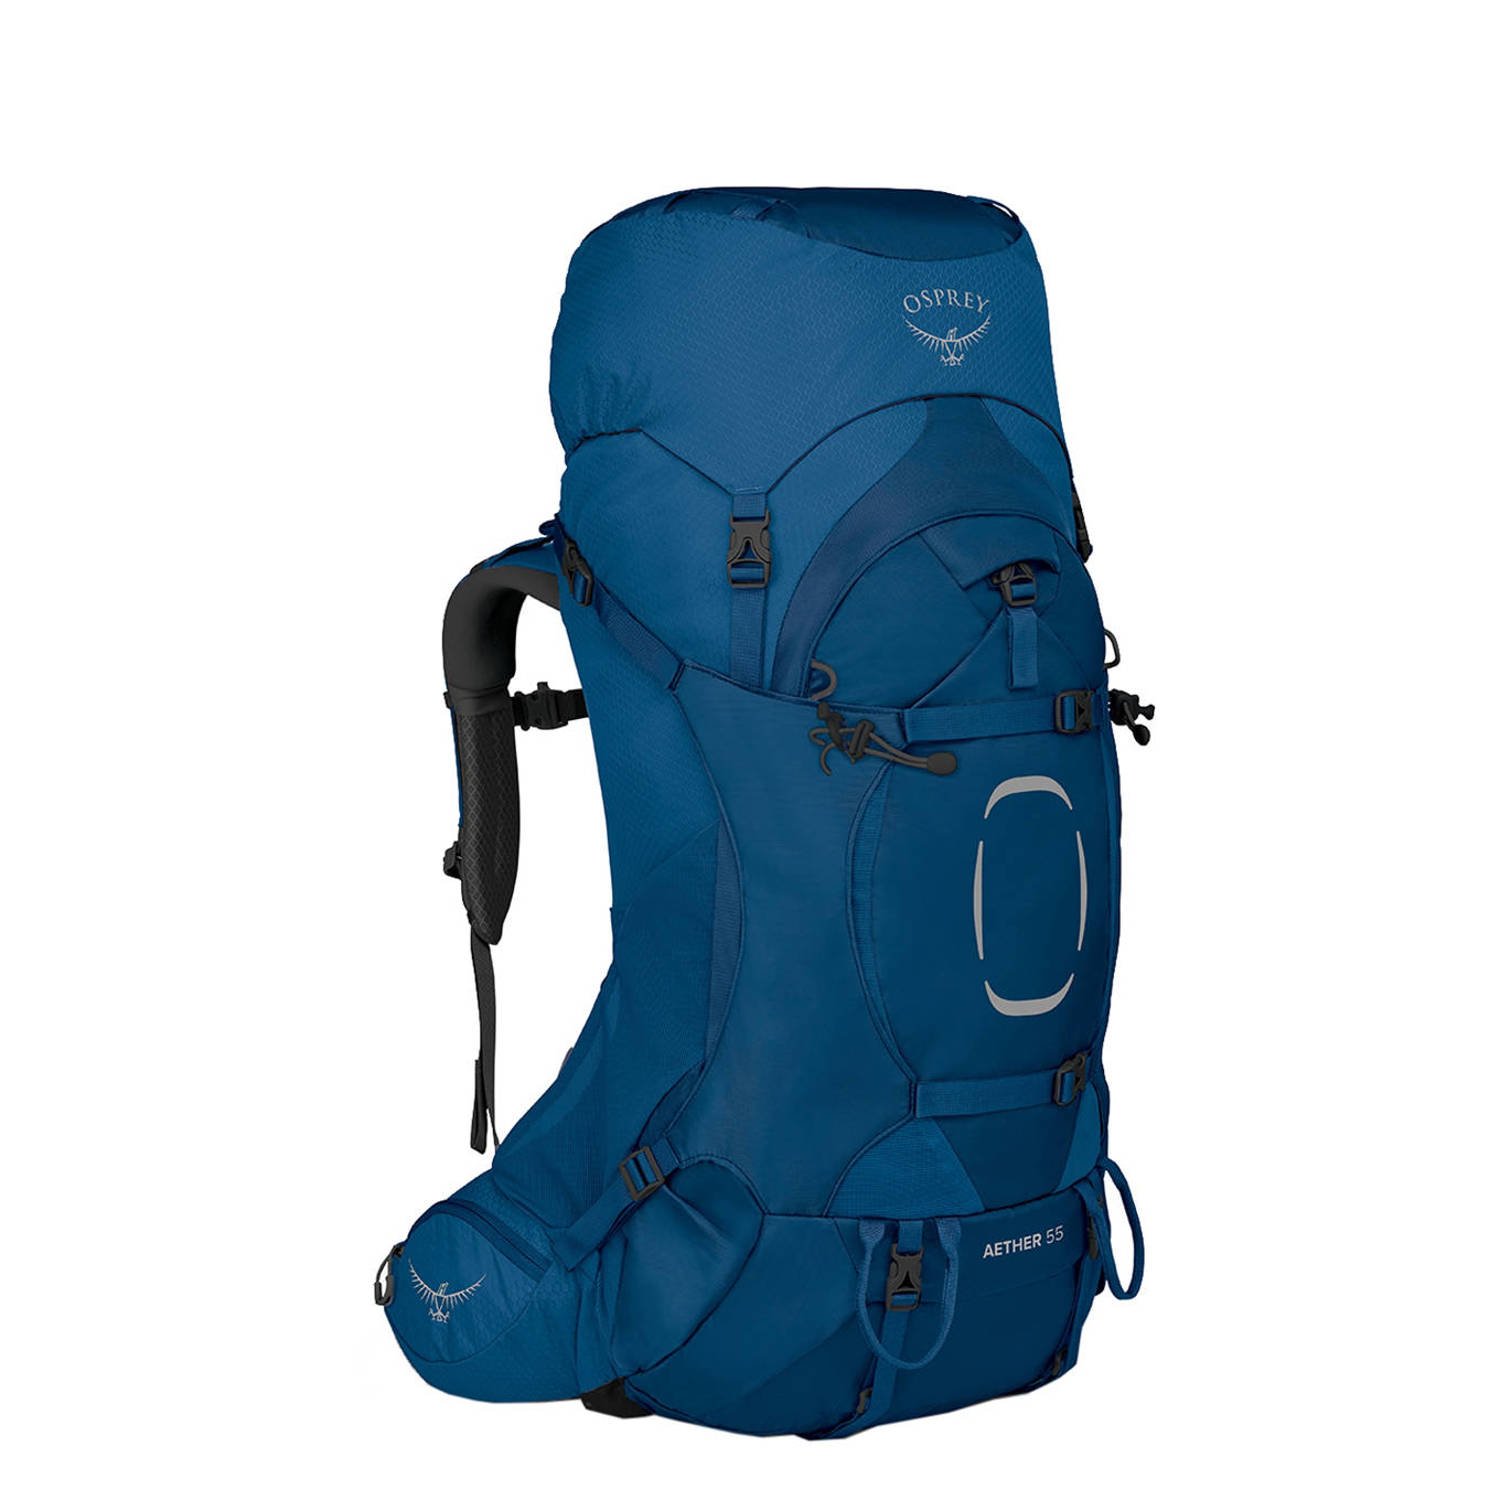 Osprey backpack Aether 55 S M blauw